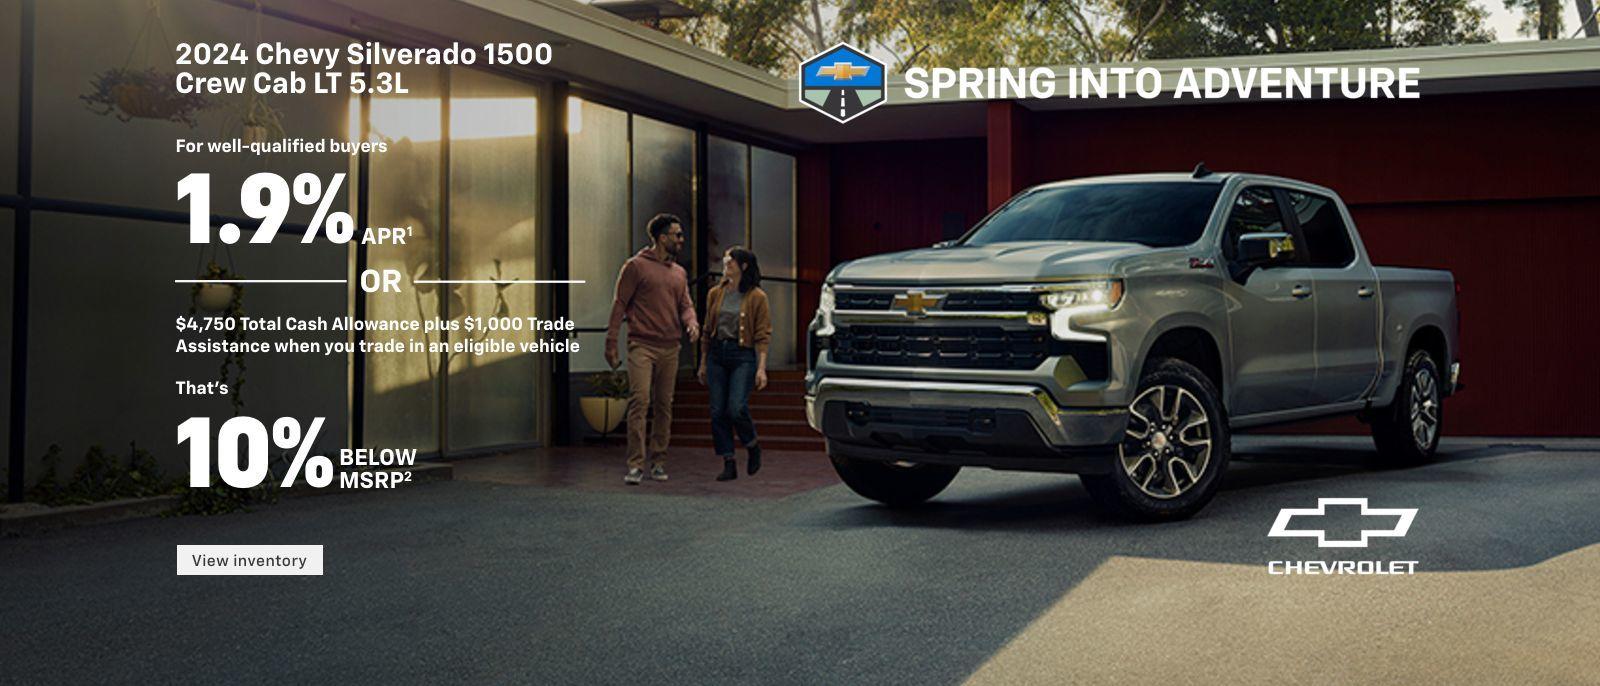 2024 Chevy Silverado 1500 LT 5.3L. For well-qualified buyers 1.9% APR. Or, $4,750 Total Cash Allowance plus $1,000 Trade Assistance when you trade in an eligible vehicle. That's, 10% below MSRP.